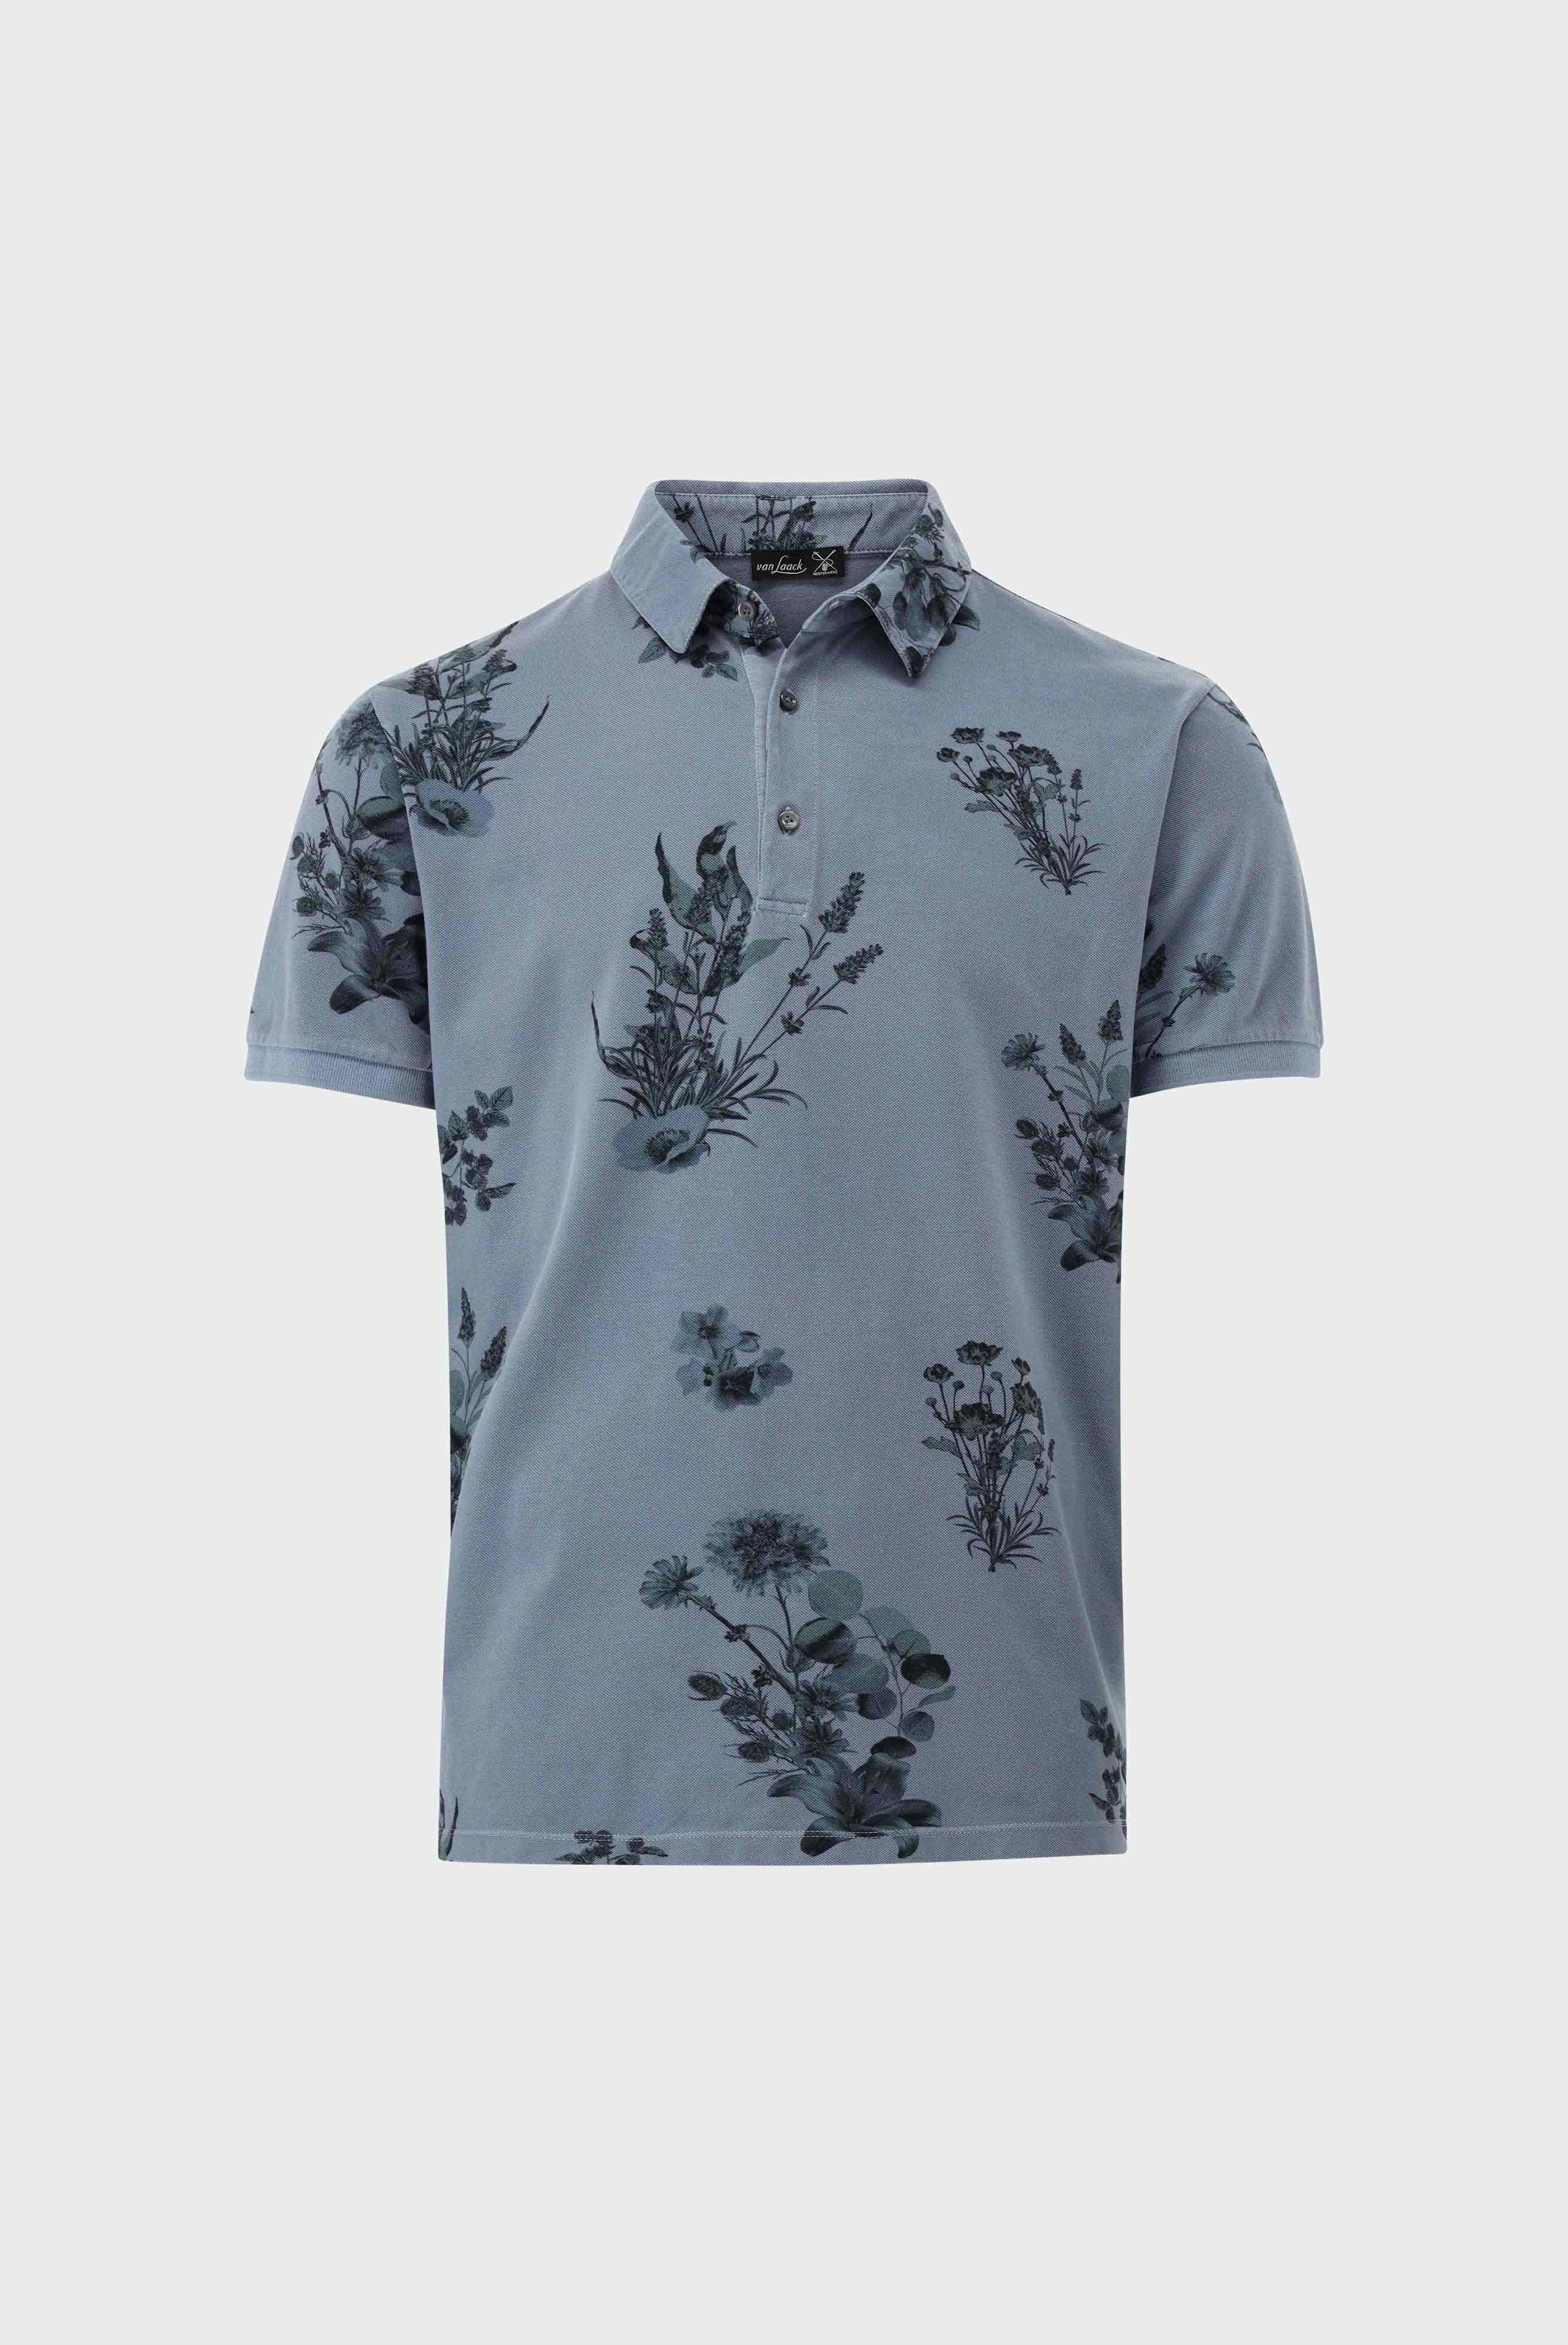 Poloshirts+Garment dyed Piquet Polo with Print+20.1650.SY.Z20047.760.M